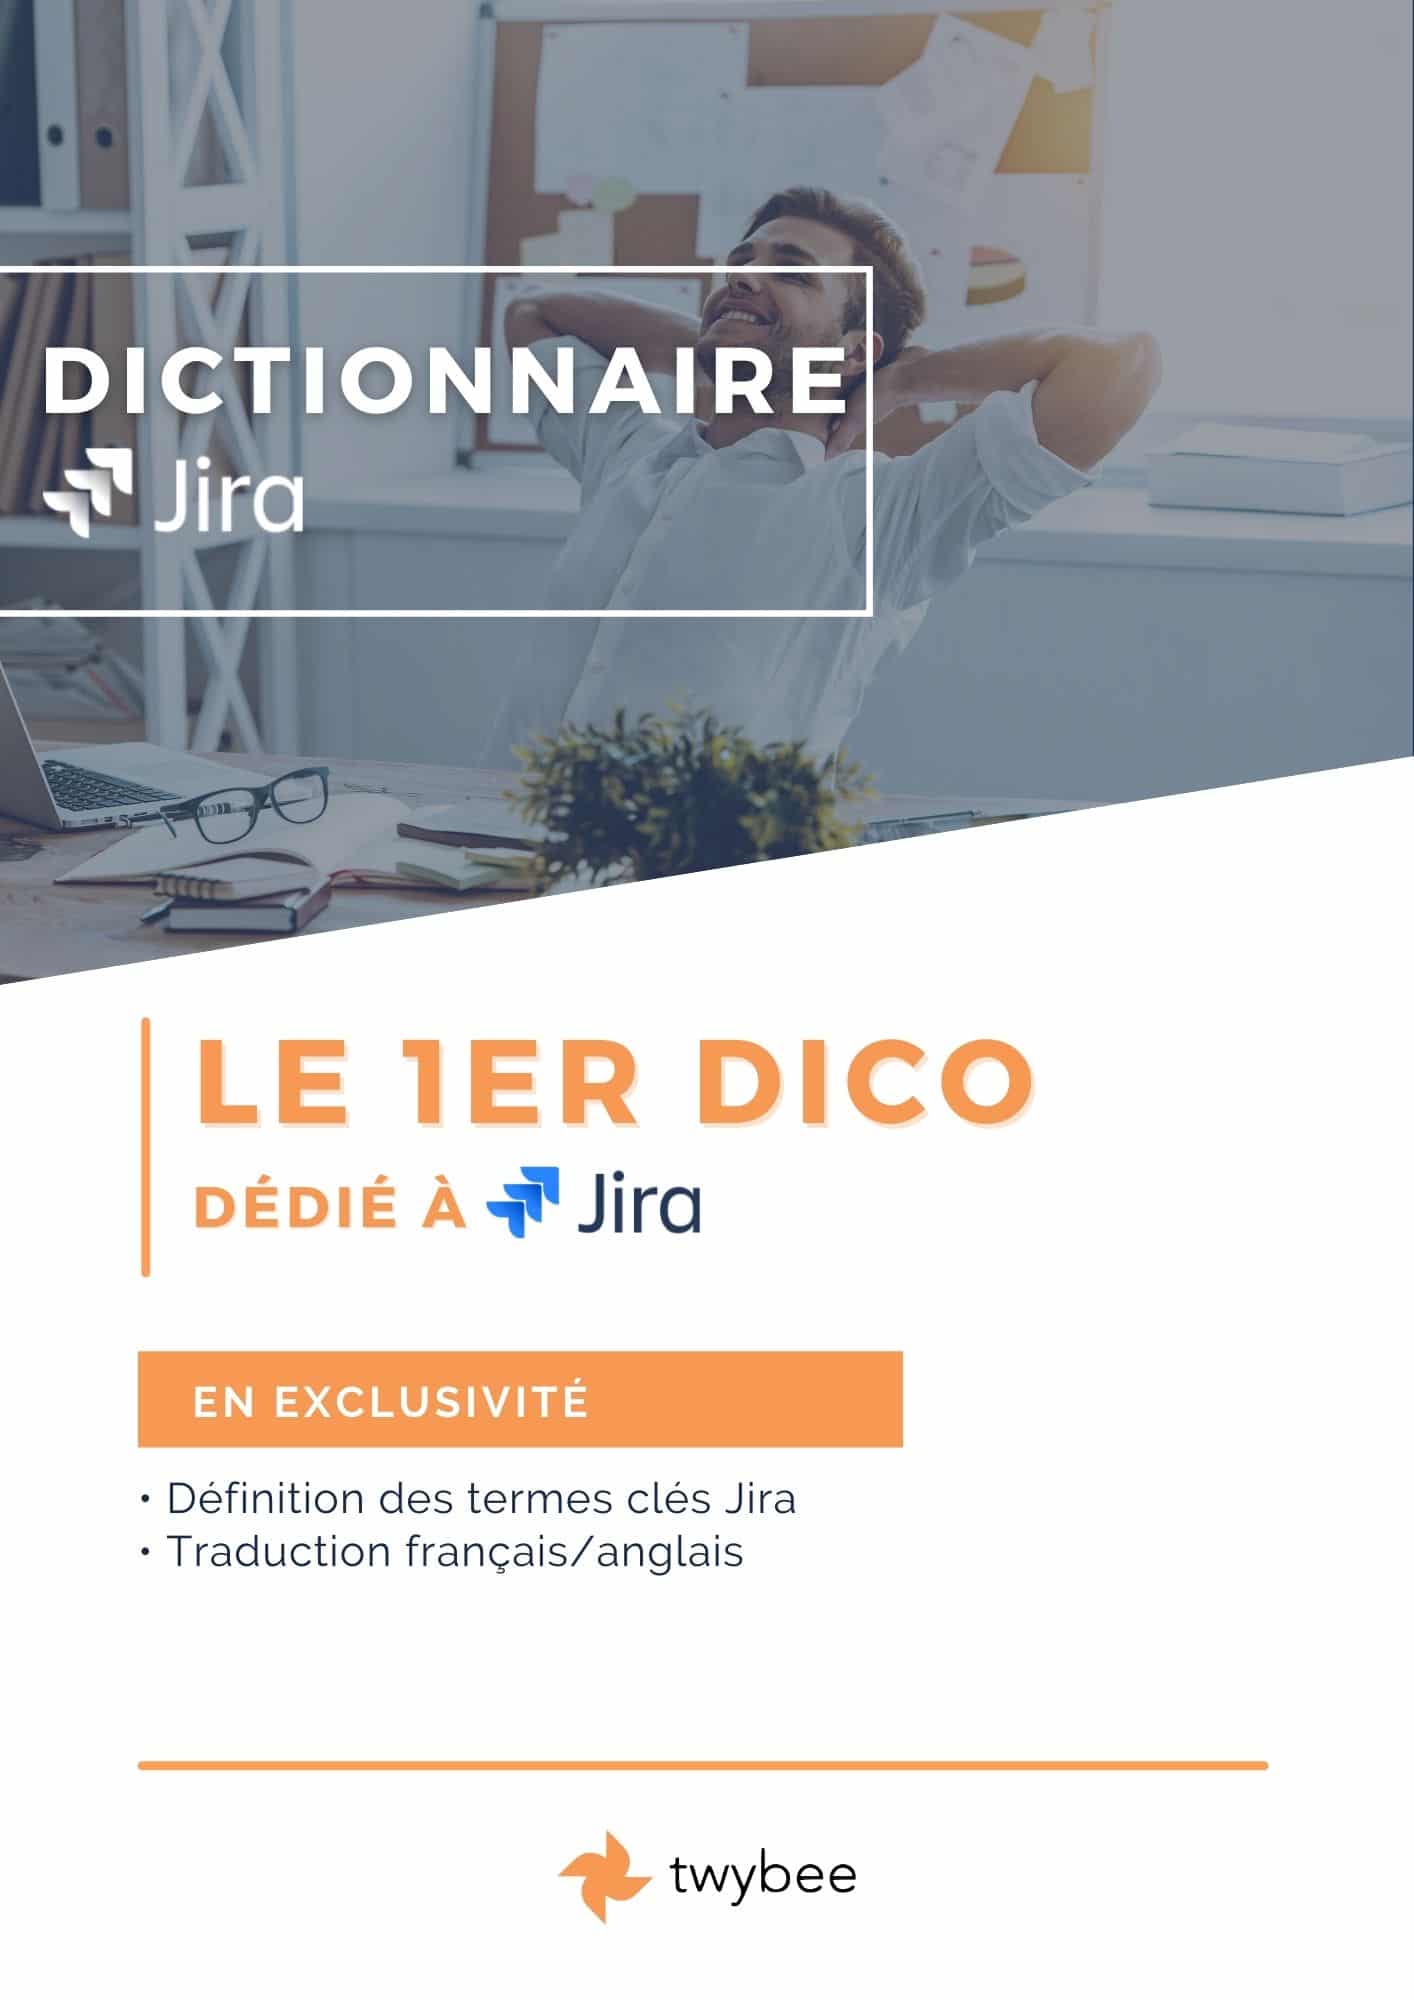 dictionnaire glossaire jira